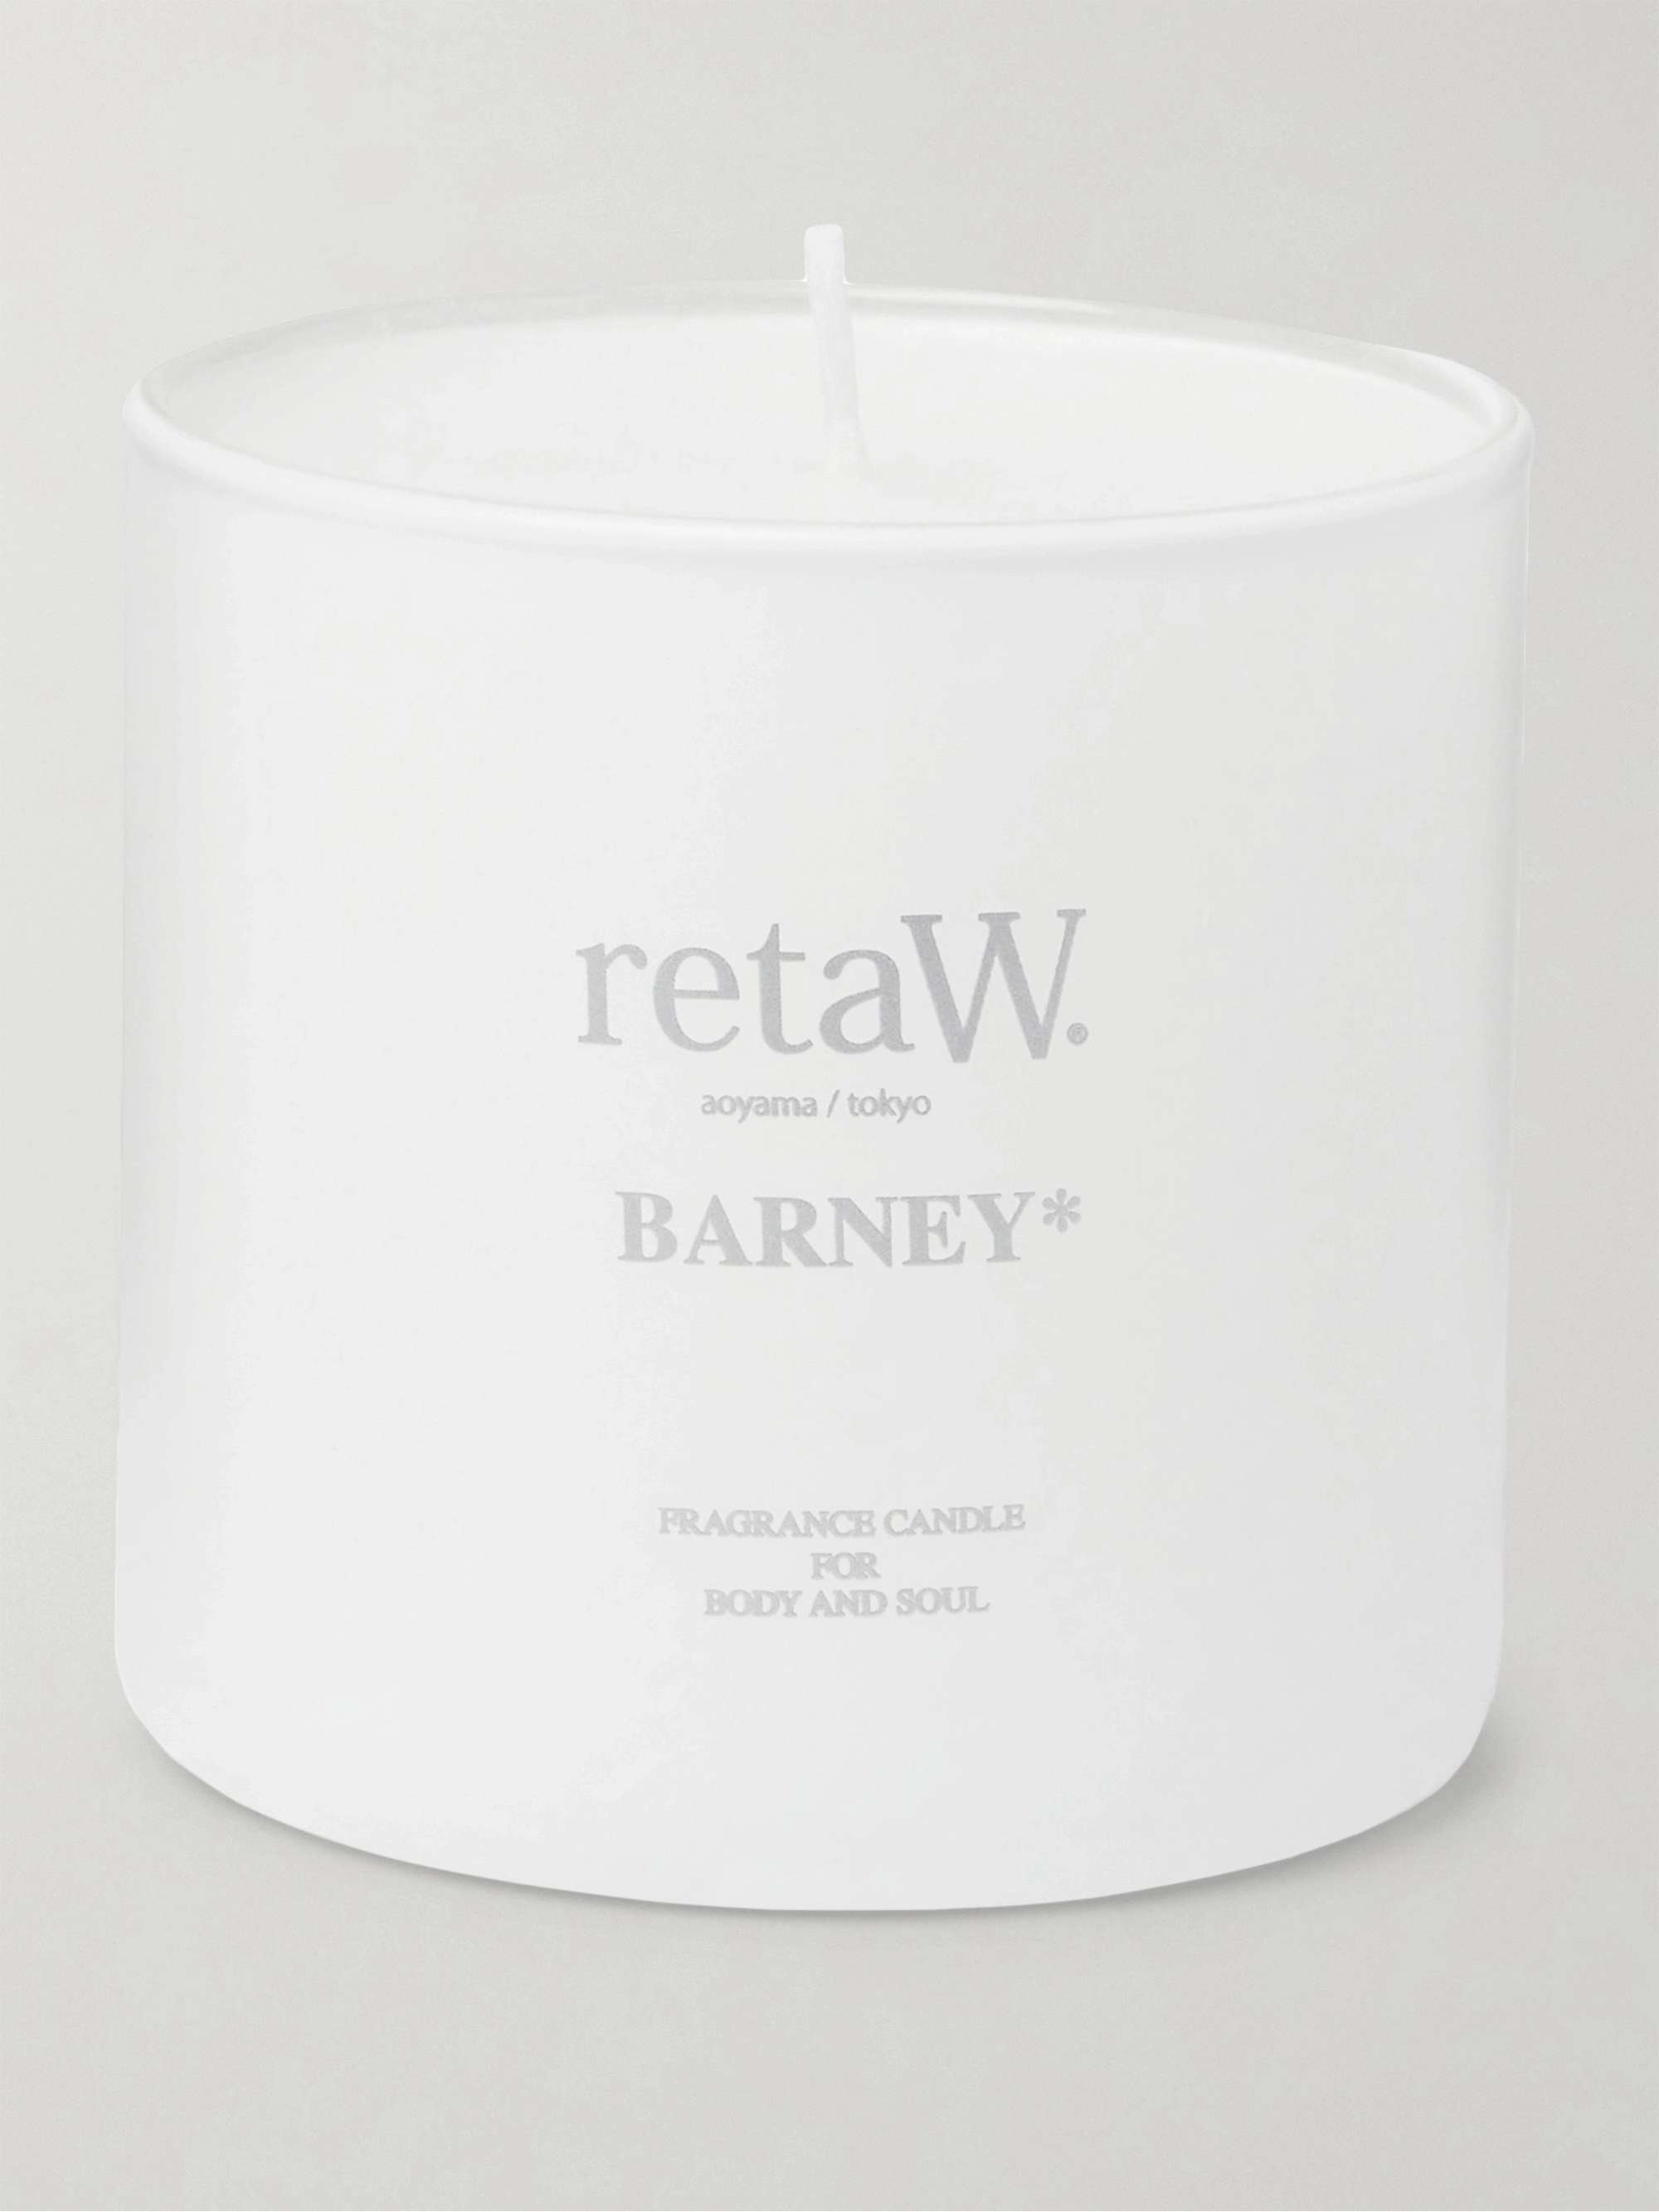 RETAW Barney Scented Candle, 145g